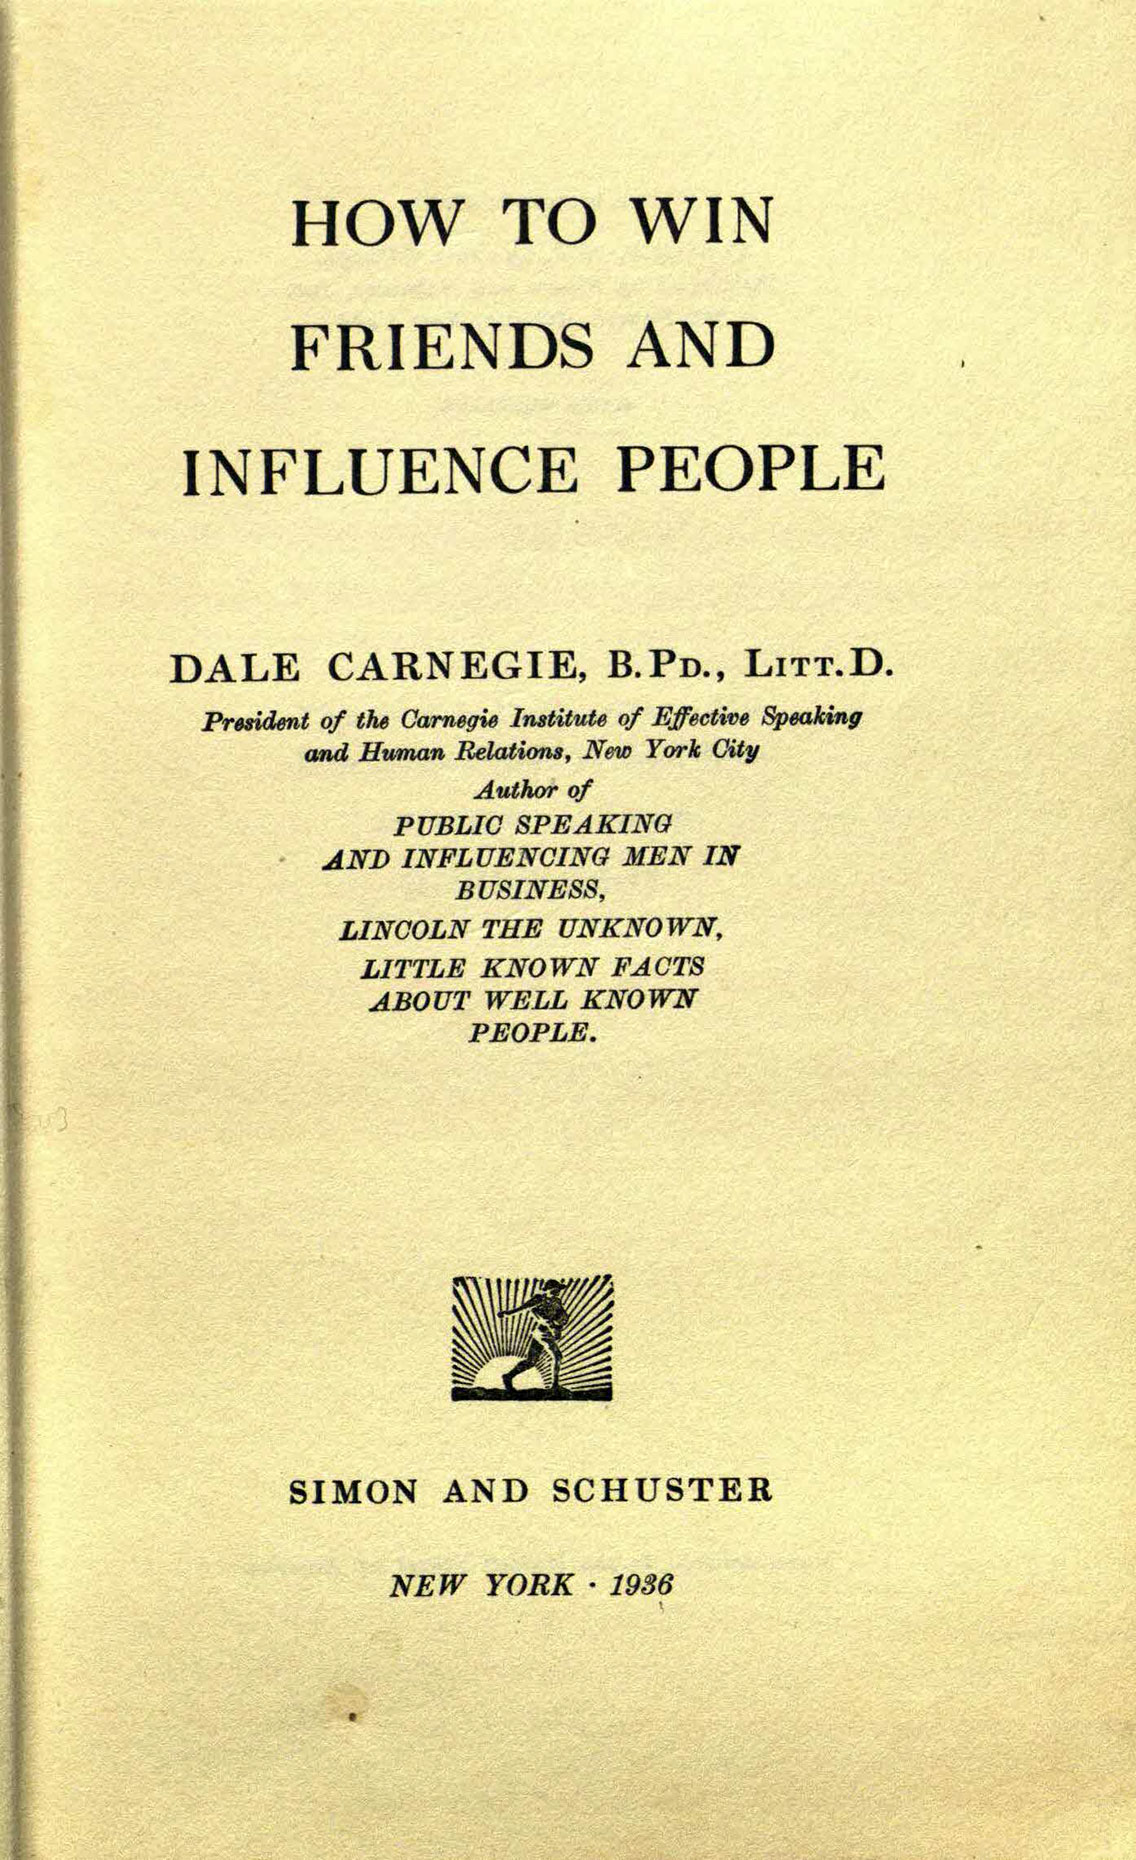 Is there any truth to Dale Carnegie's How to Win Friends and